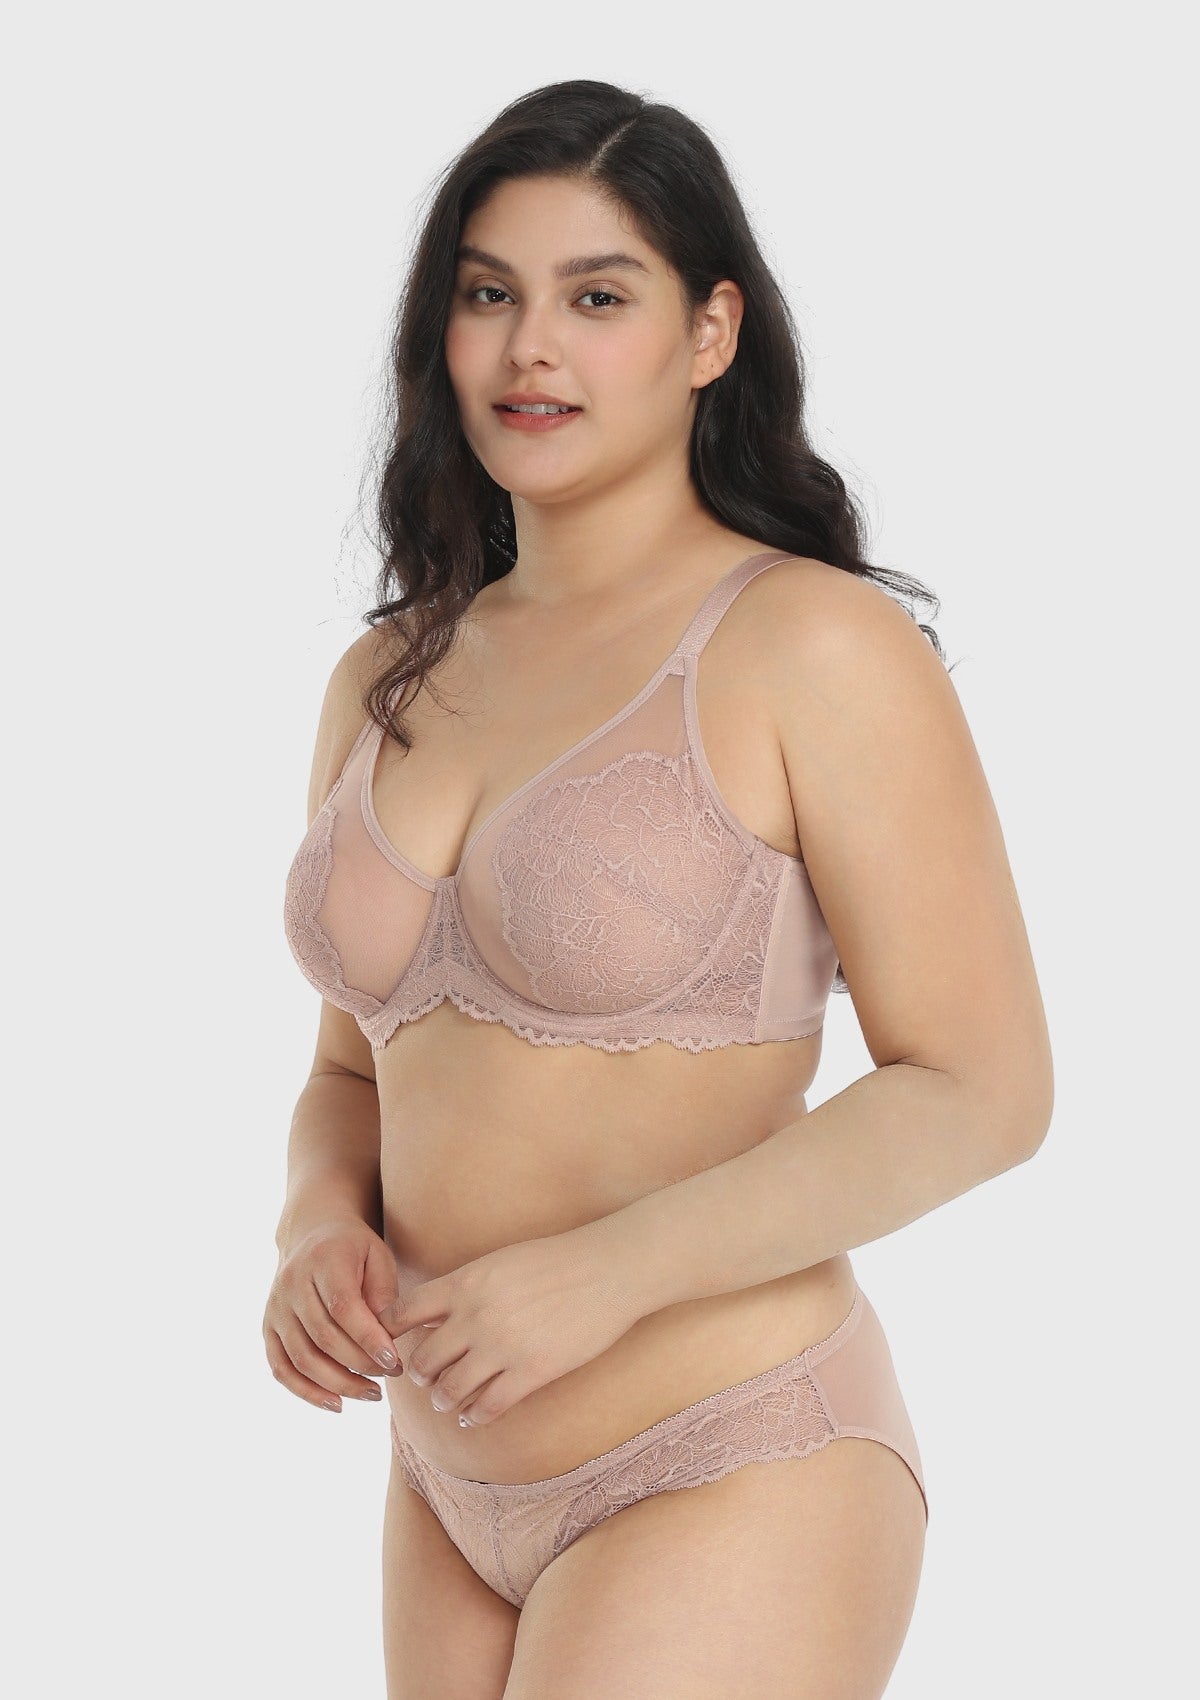 HSIA Blossom Plus Size Lace Bra - Wired, Unpadded, See-Through - Dark Pink / 38 / DD/E